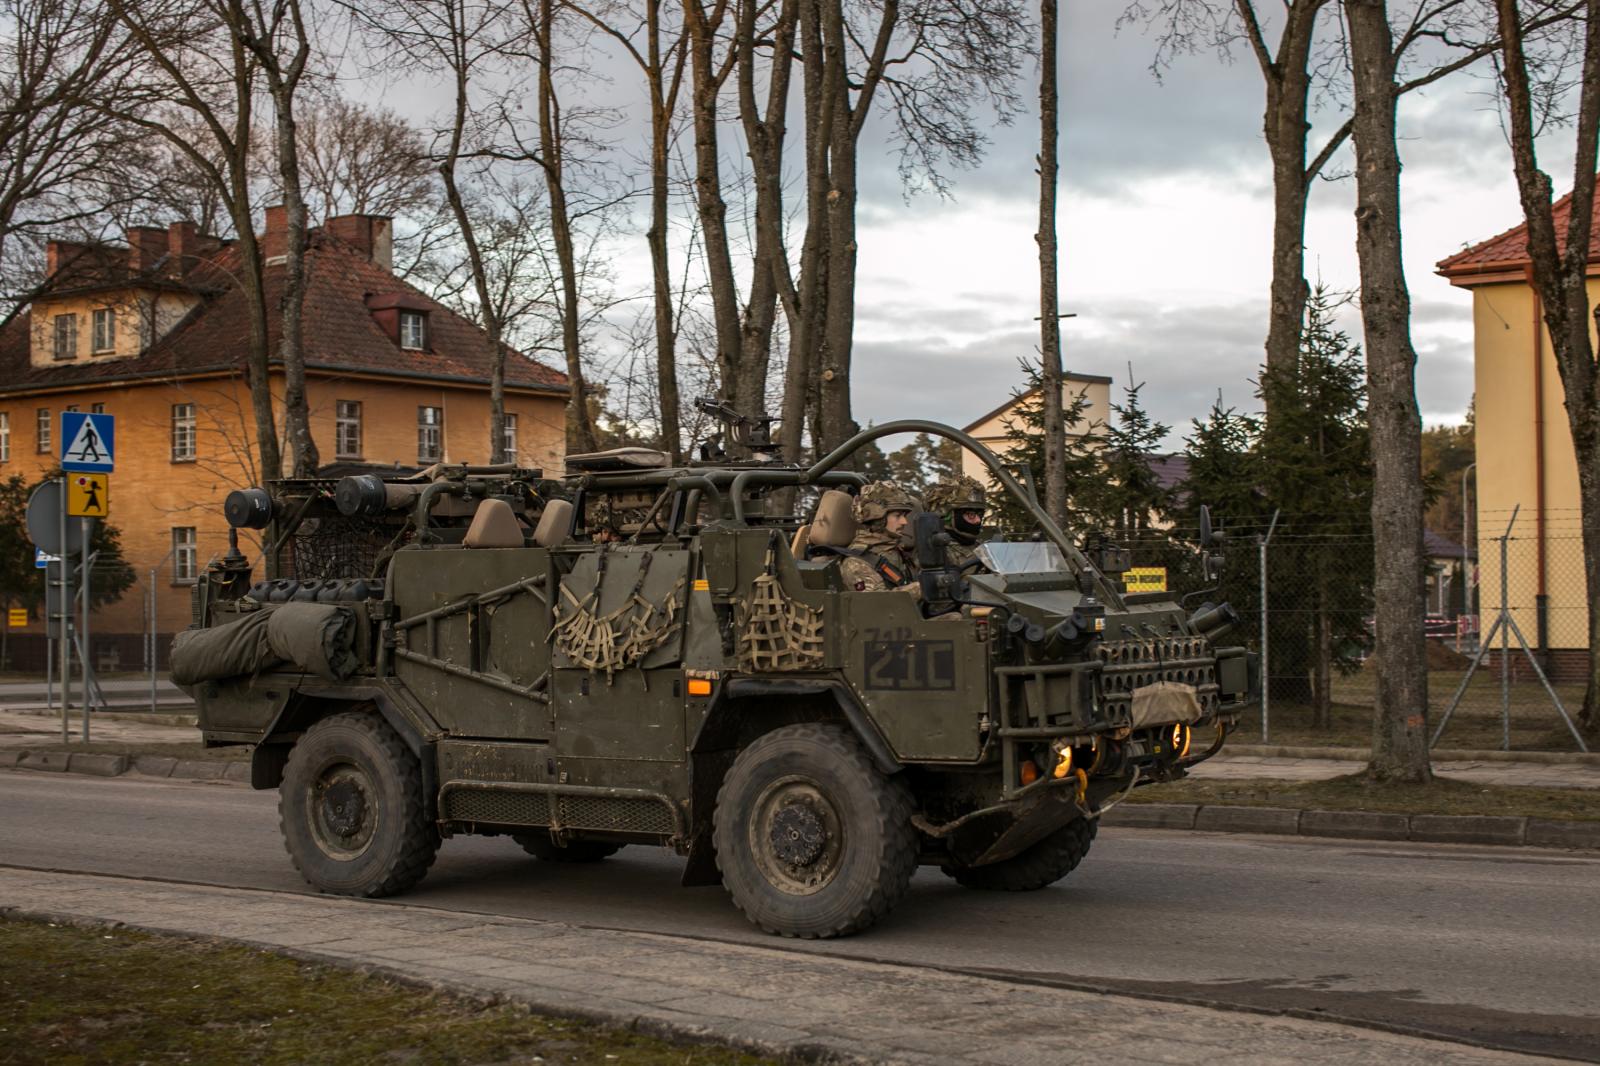 Base of NATO Battle Group in Poland (on assignment for The Globe and Mail)